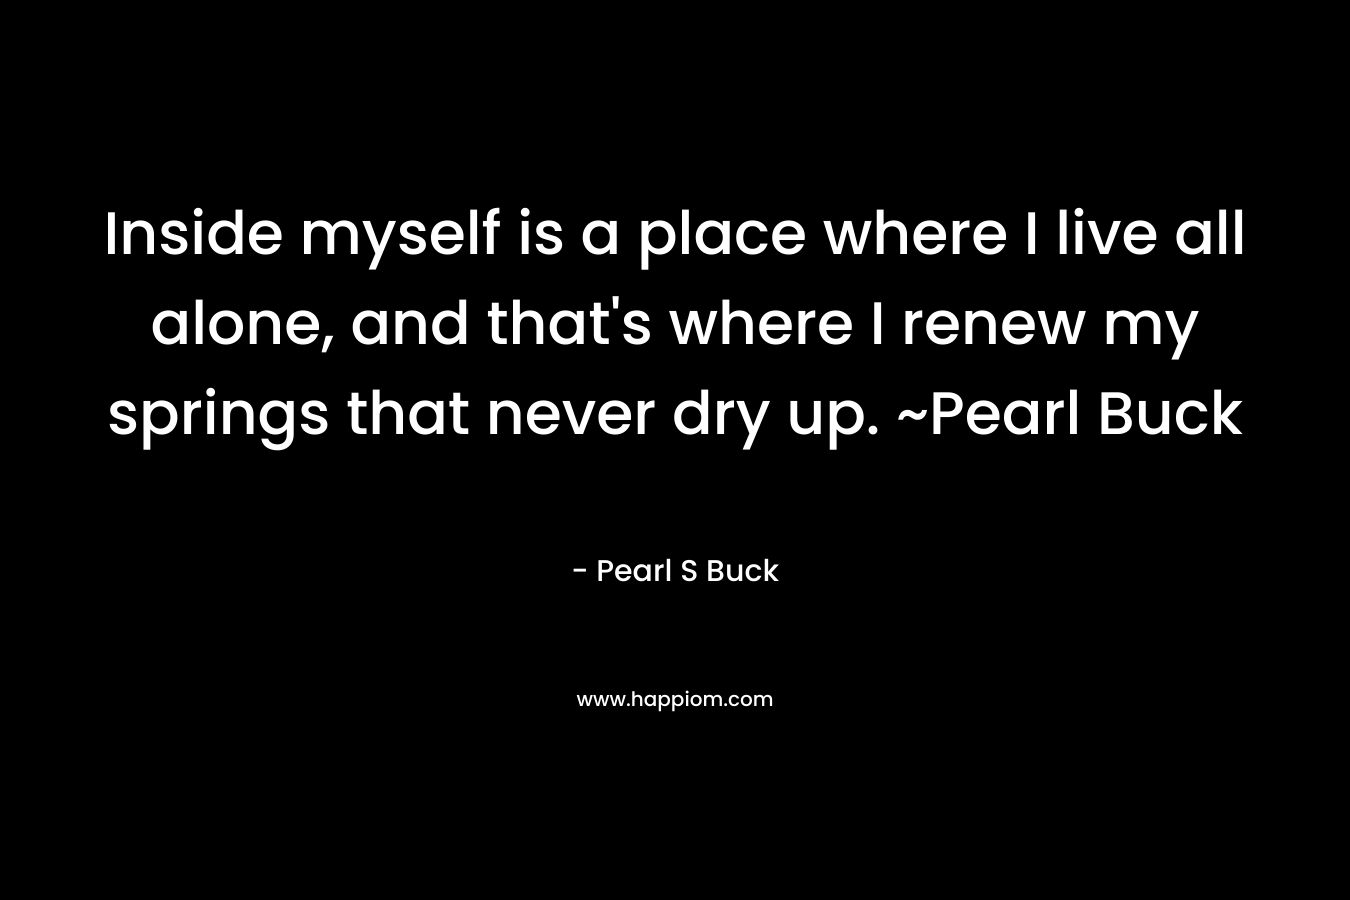 Inside myself is a place where I live all alone, and that's where I renew my springs that never dry up. ~Pearl Buck